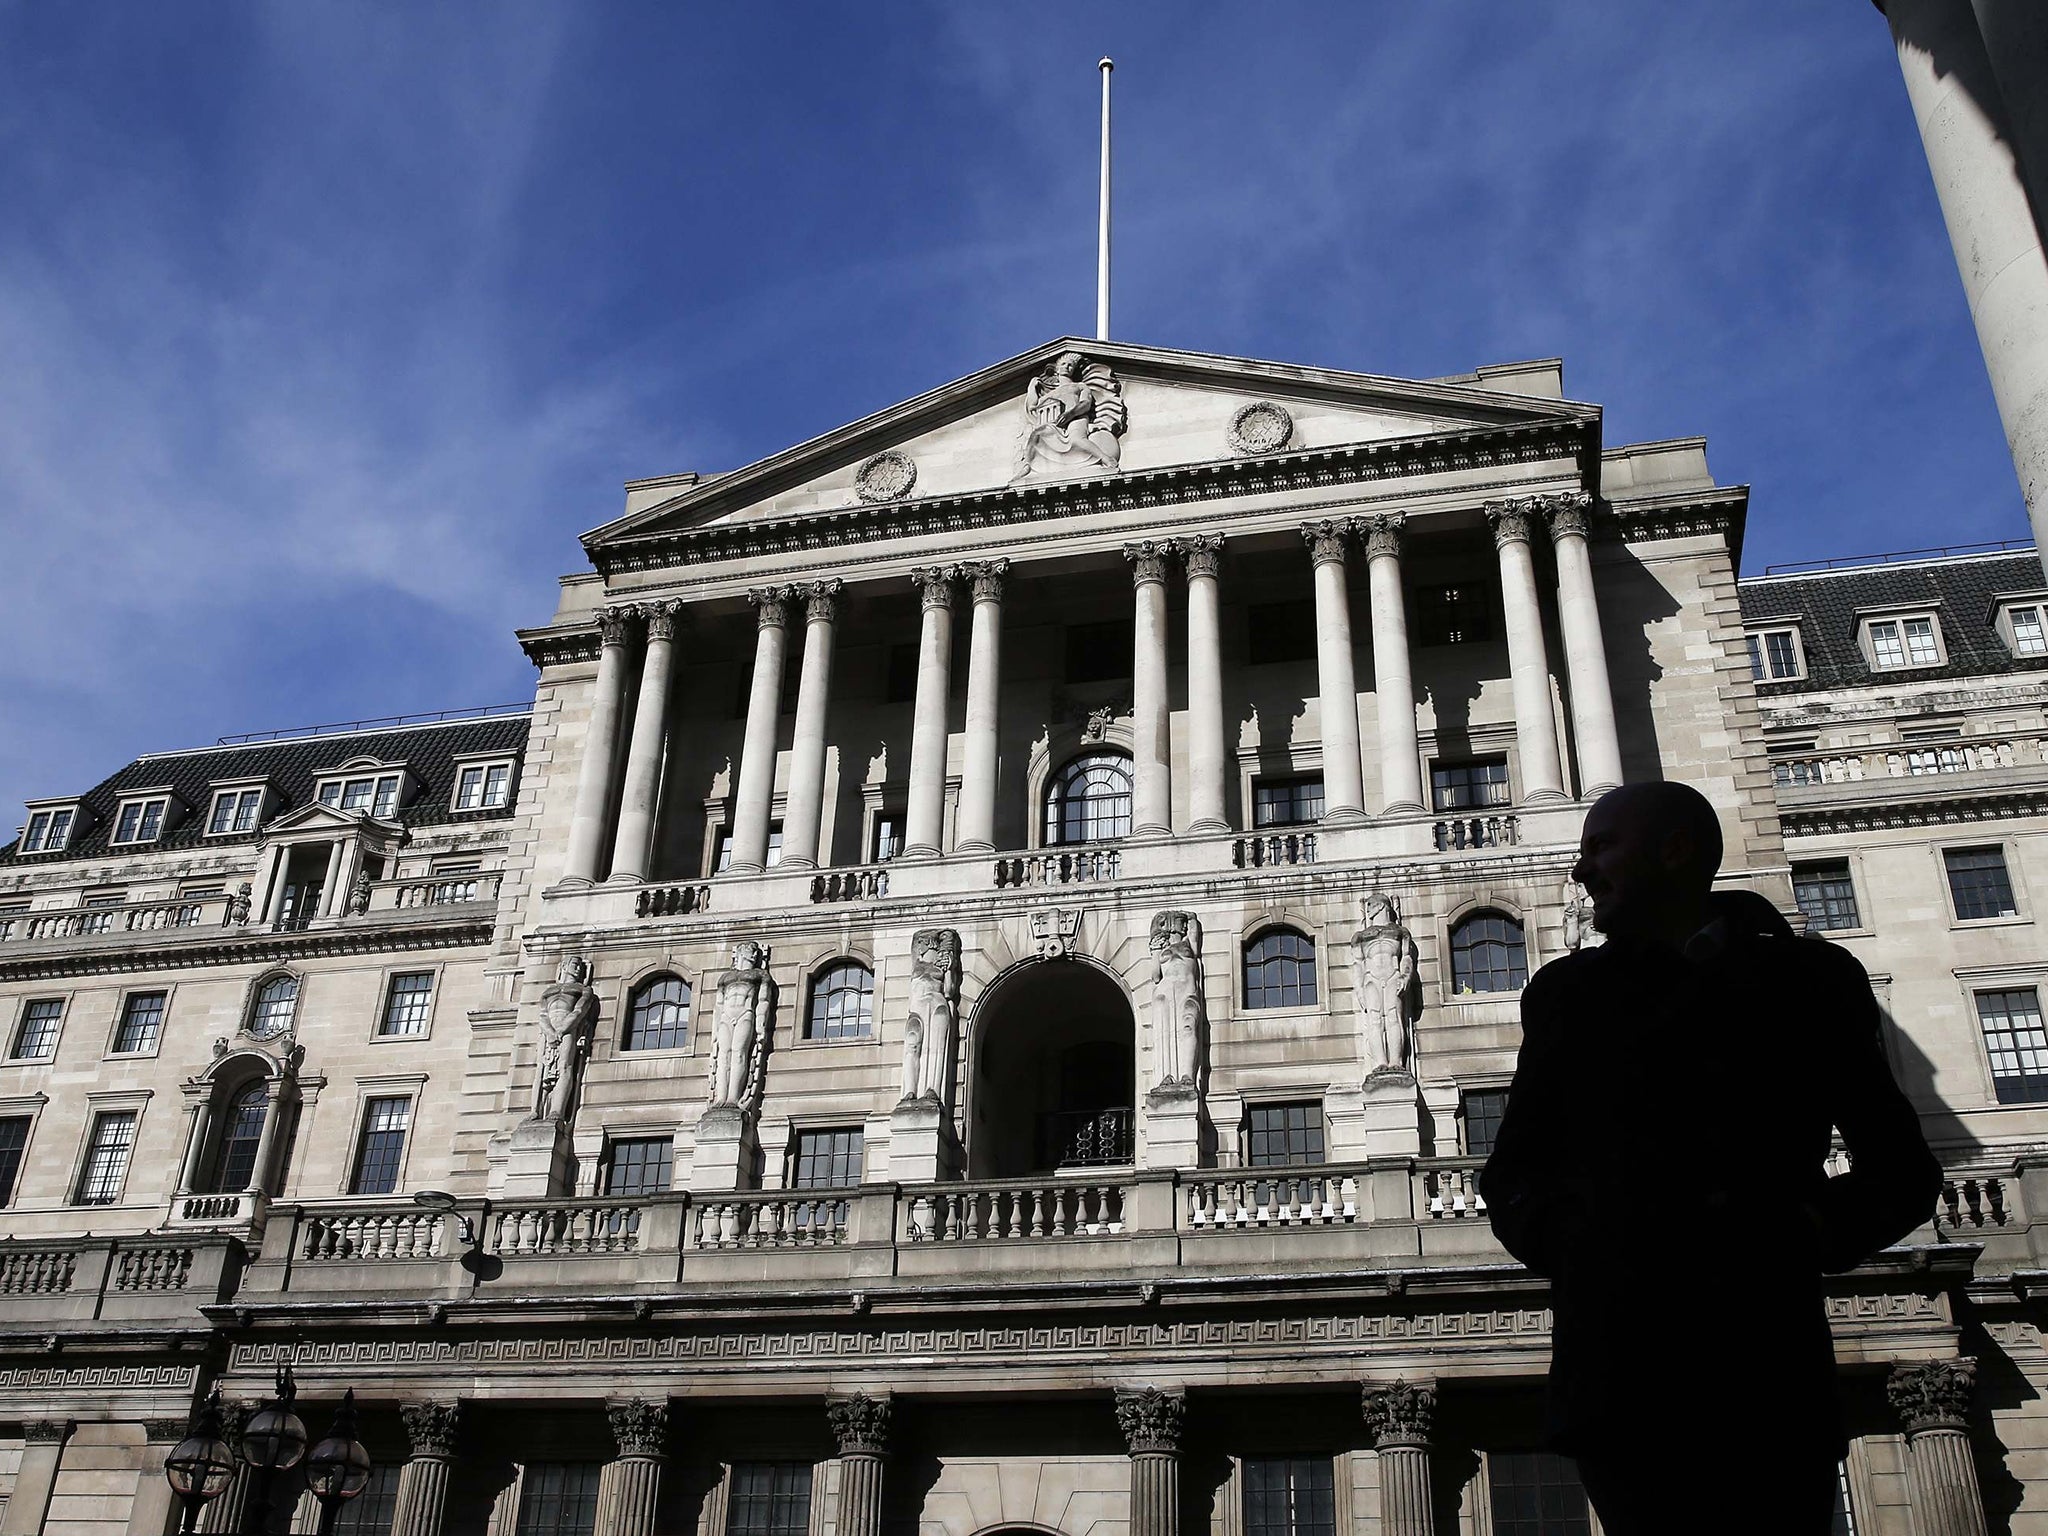 The Bank of England has become embroiled in an investigation that could damage the 321-year-old institution